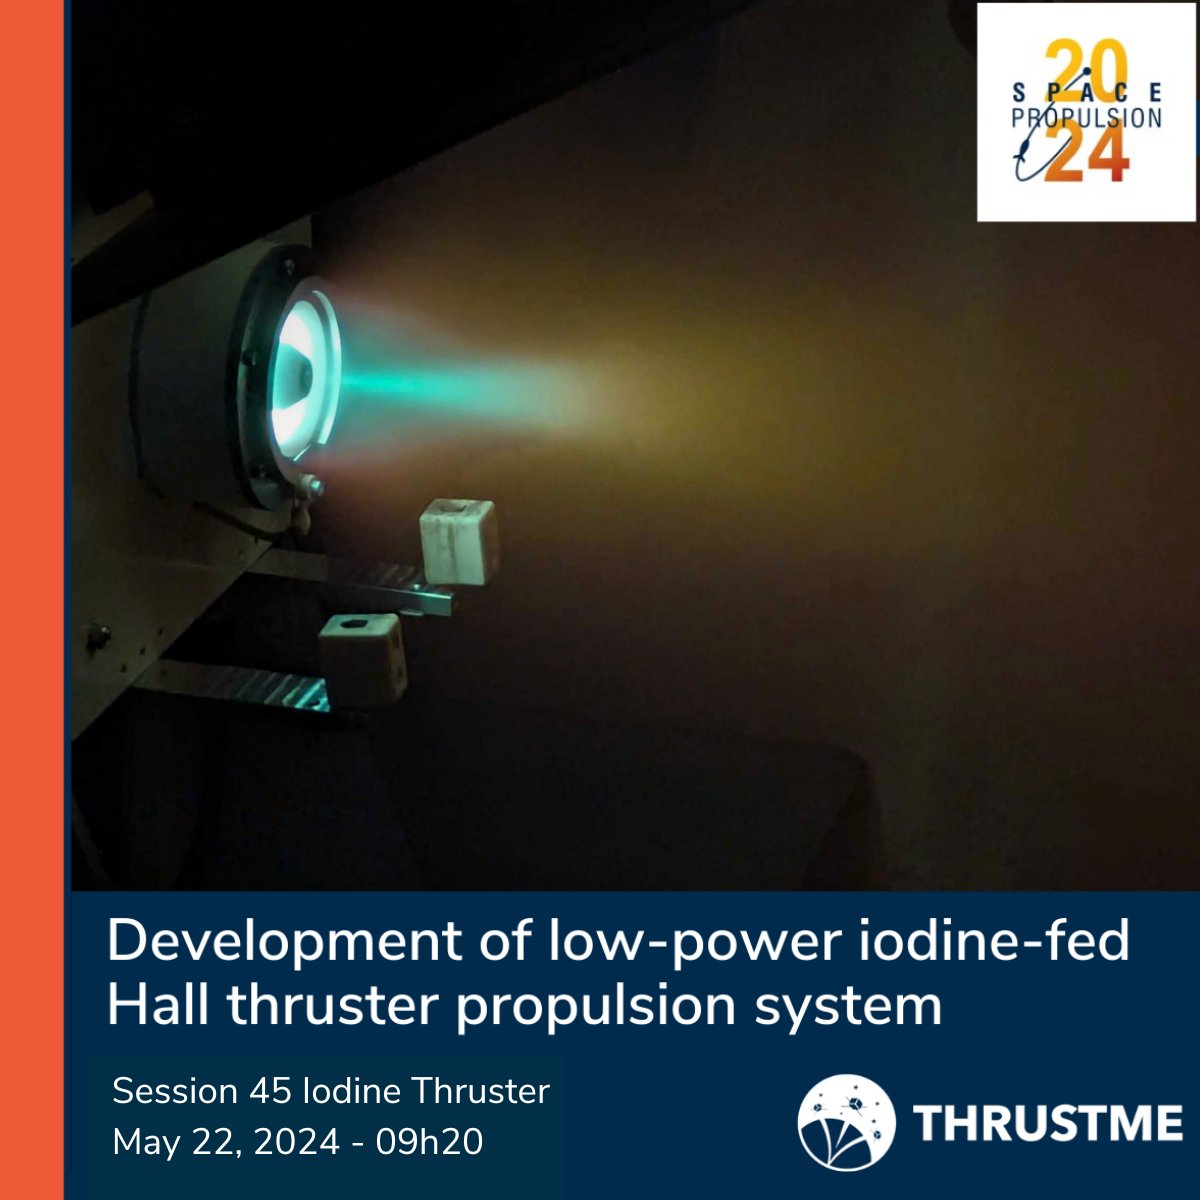 🚀 The development of the ThrustMe iodine-fed Hall thruster propulsion system will be presented at the Space Propulsion Conference!

#SP2024 #space #propulsion #hallthruster #iodine #plasma #newdevelopment